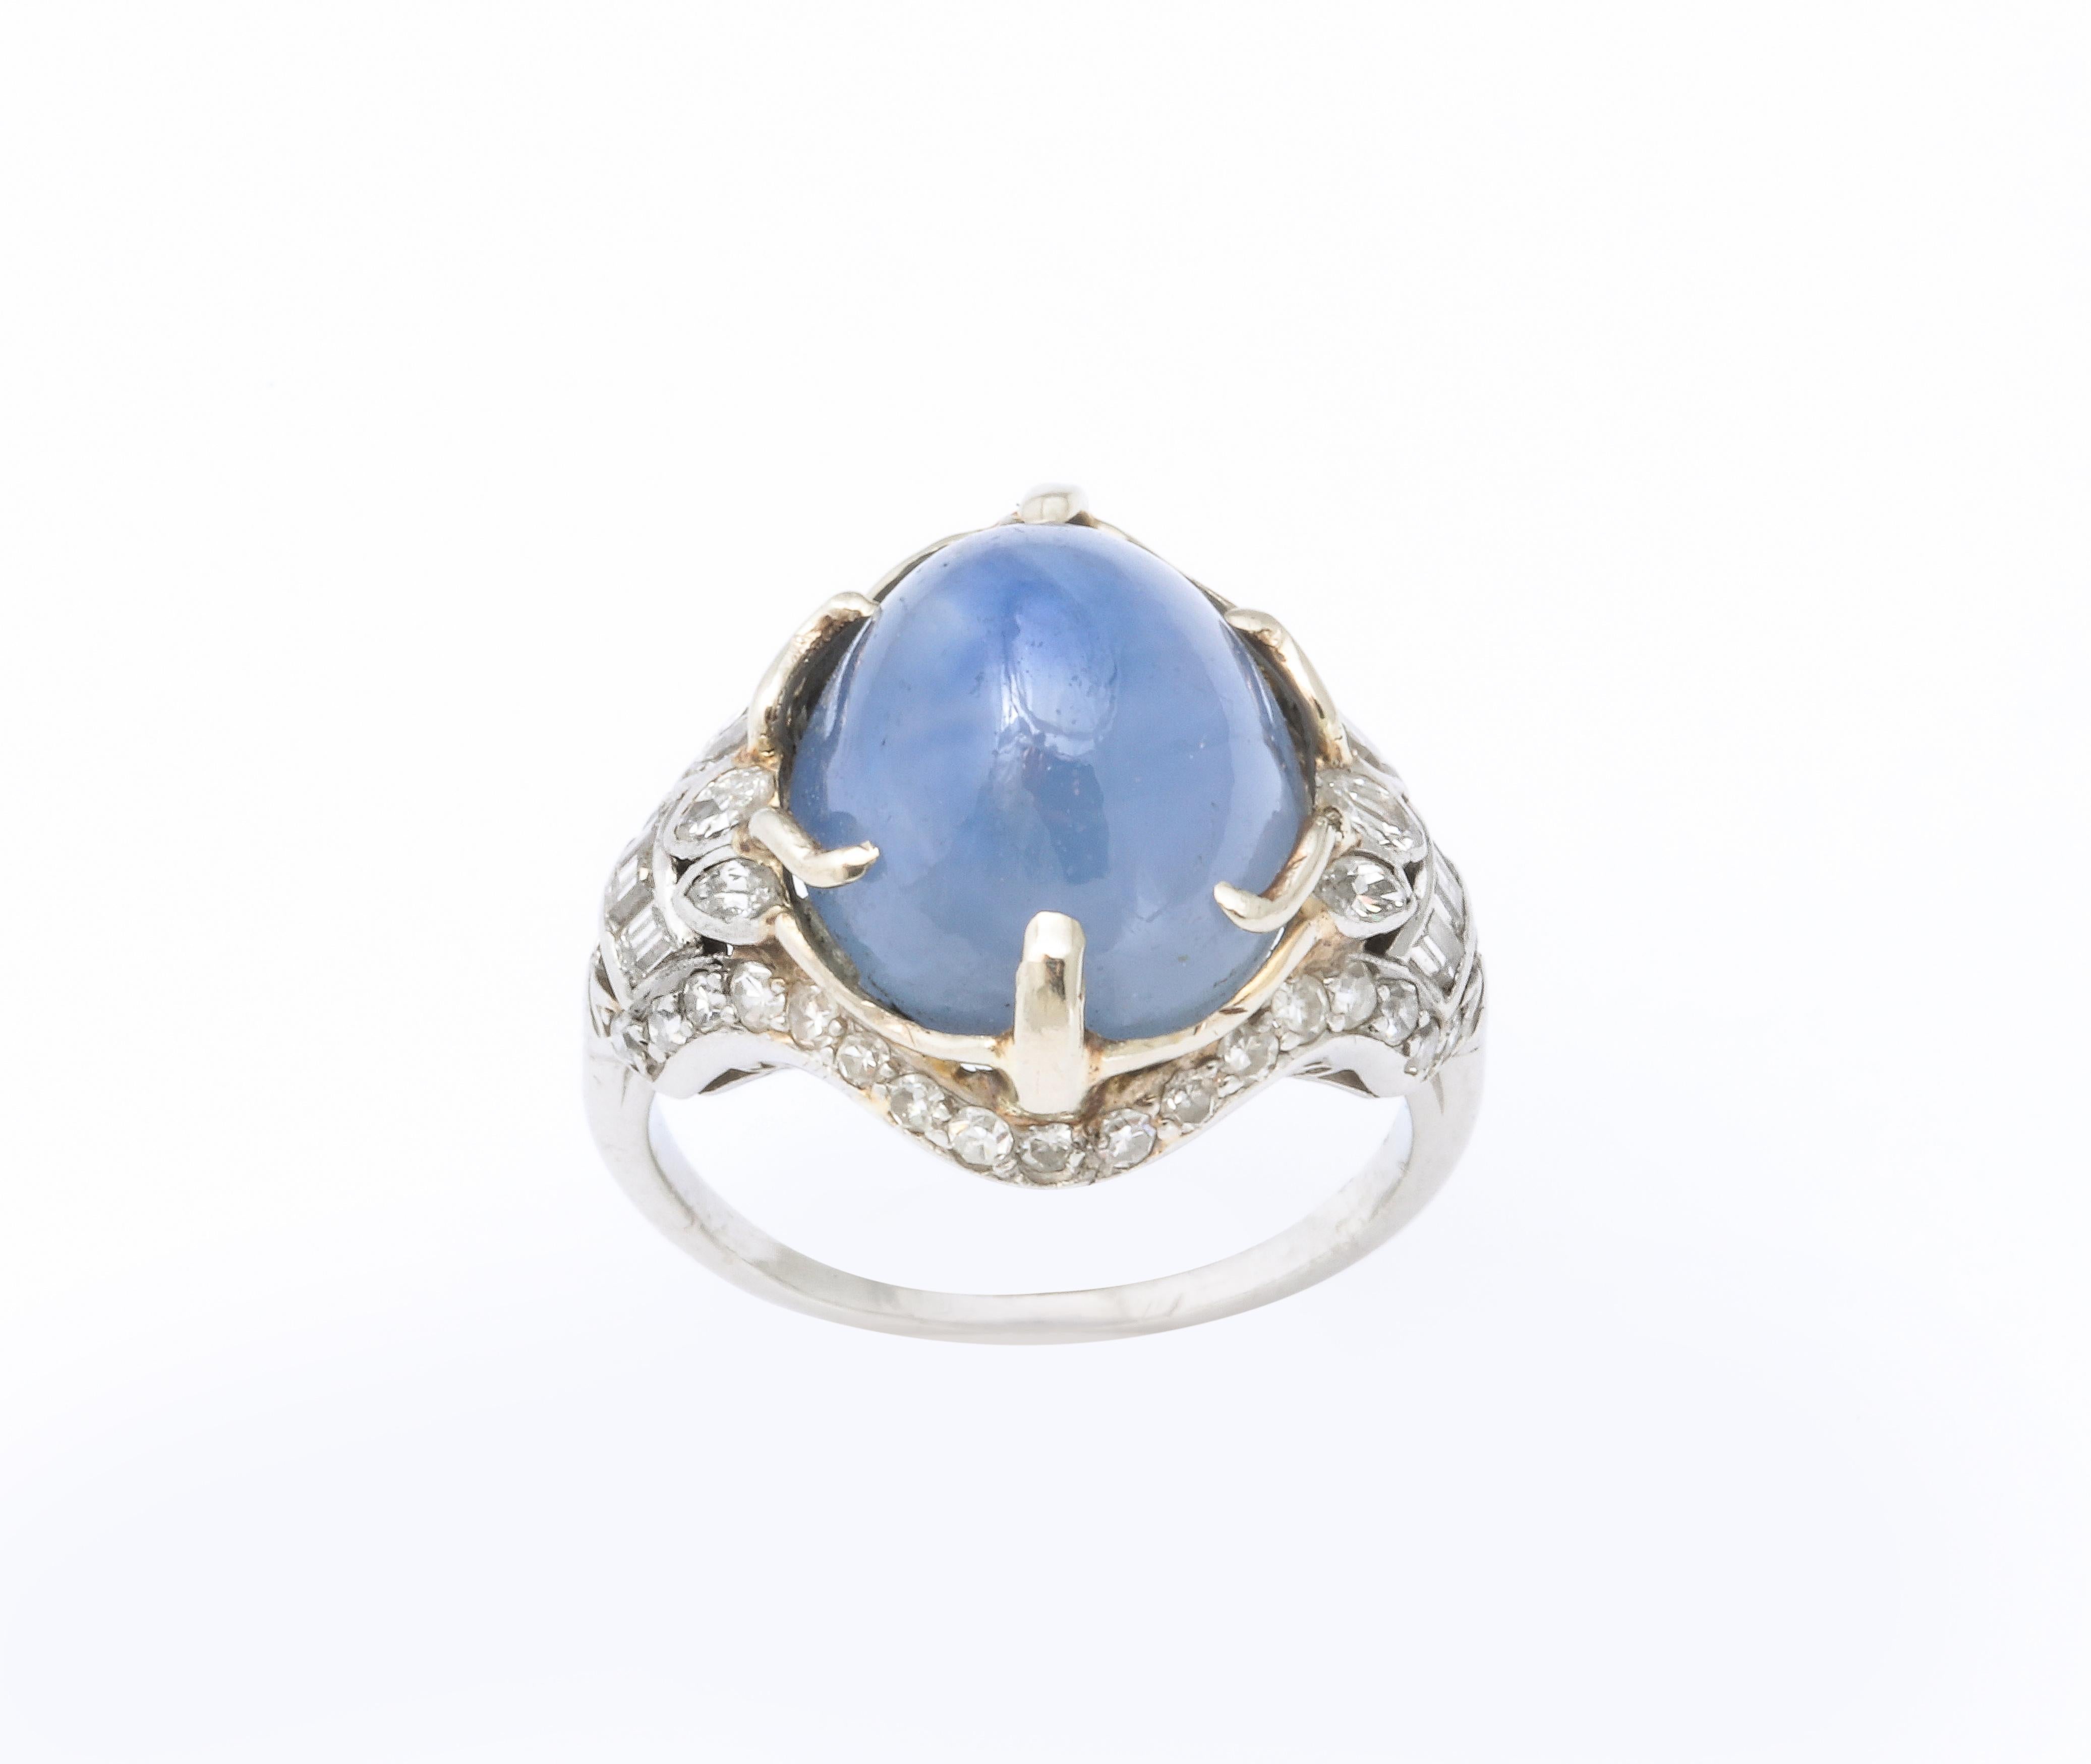 A wonderful  French Art Deco natural un heated cabochon 12.50 Cts Star Sapphire surrounded by mine cut combination of square cuts and marquis diamonds and baguettes set in Platinum. Appraisal available.